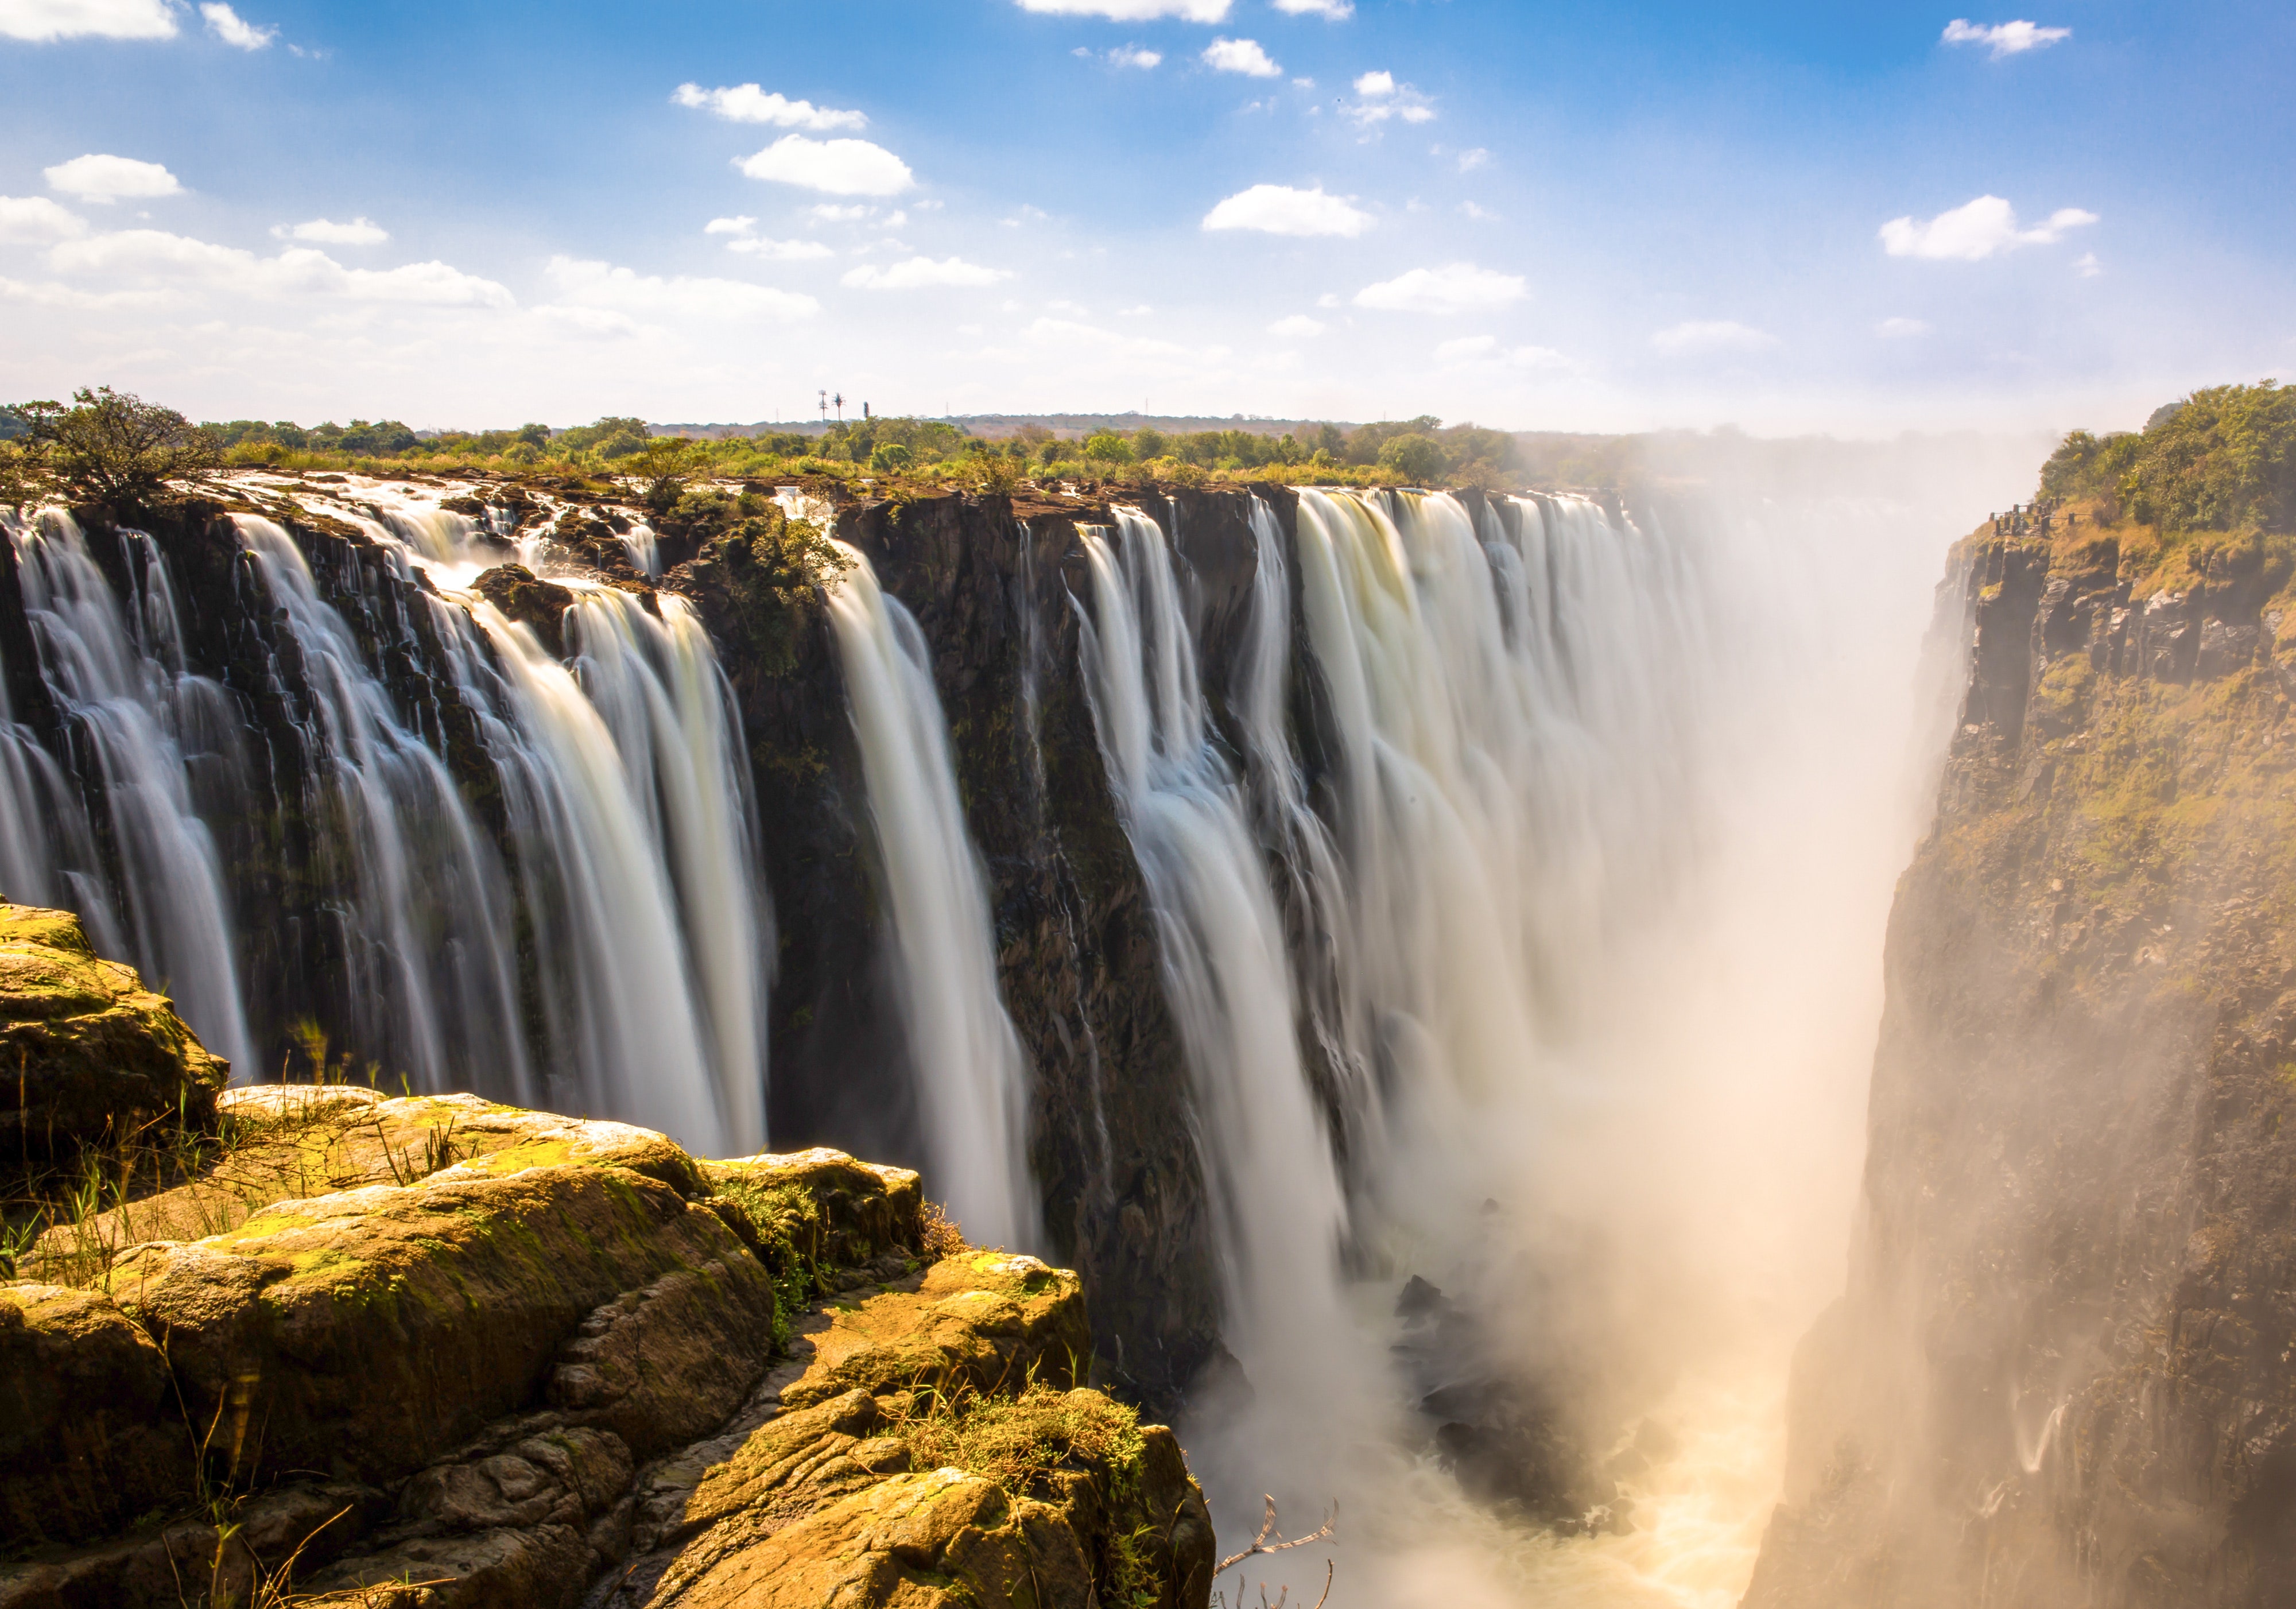 Nothing compares to standing in front of the world’s <a href="https://www.cntraveler.com/gallery/tourist-attractions-we-actually-love?mbid=synd_msn_rss&utm_source=msn&utm_medium=syndication">largest waterfall,</a> which stretches in length for a full mile. Visit between February and May (after the region’s rainy season) for the clearest views of the 500 million liters of water that pour over the falls every 60 seconds.<p>Sign up to receive the latest news, expert tips, and inspiration on all things travel</p><a href="https://www.cntraveler.com/newsletter/the-daily?sourceCode=msnsend">Inspire Me</a>